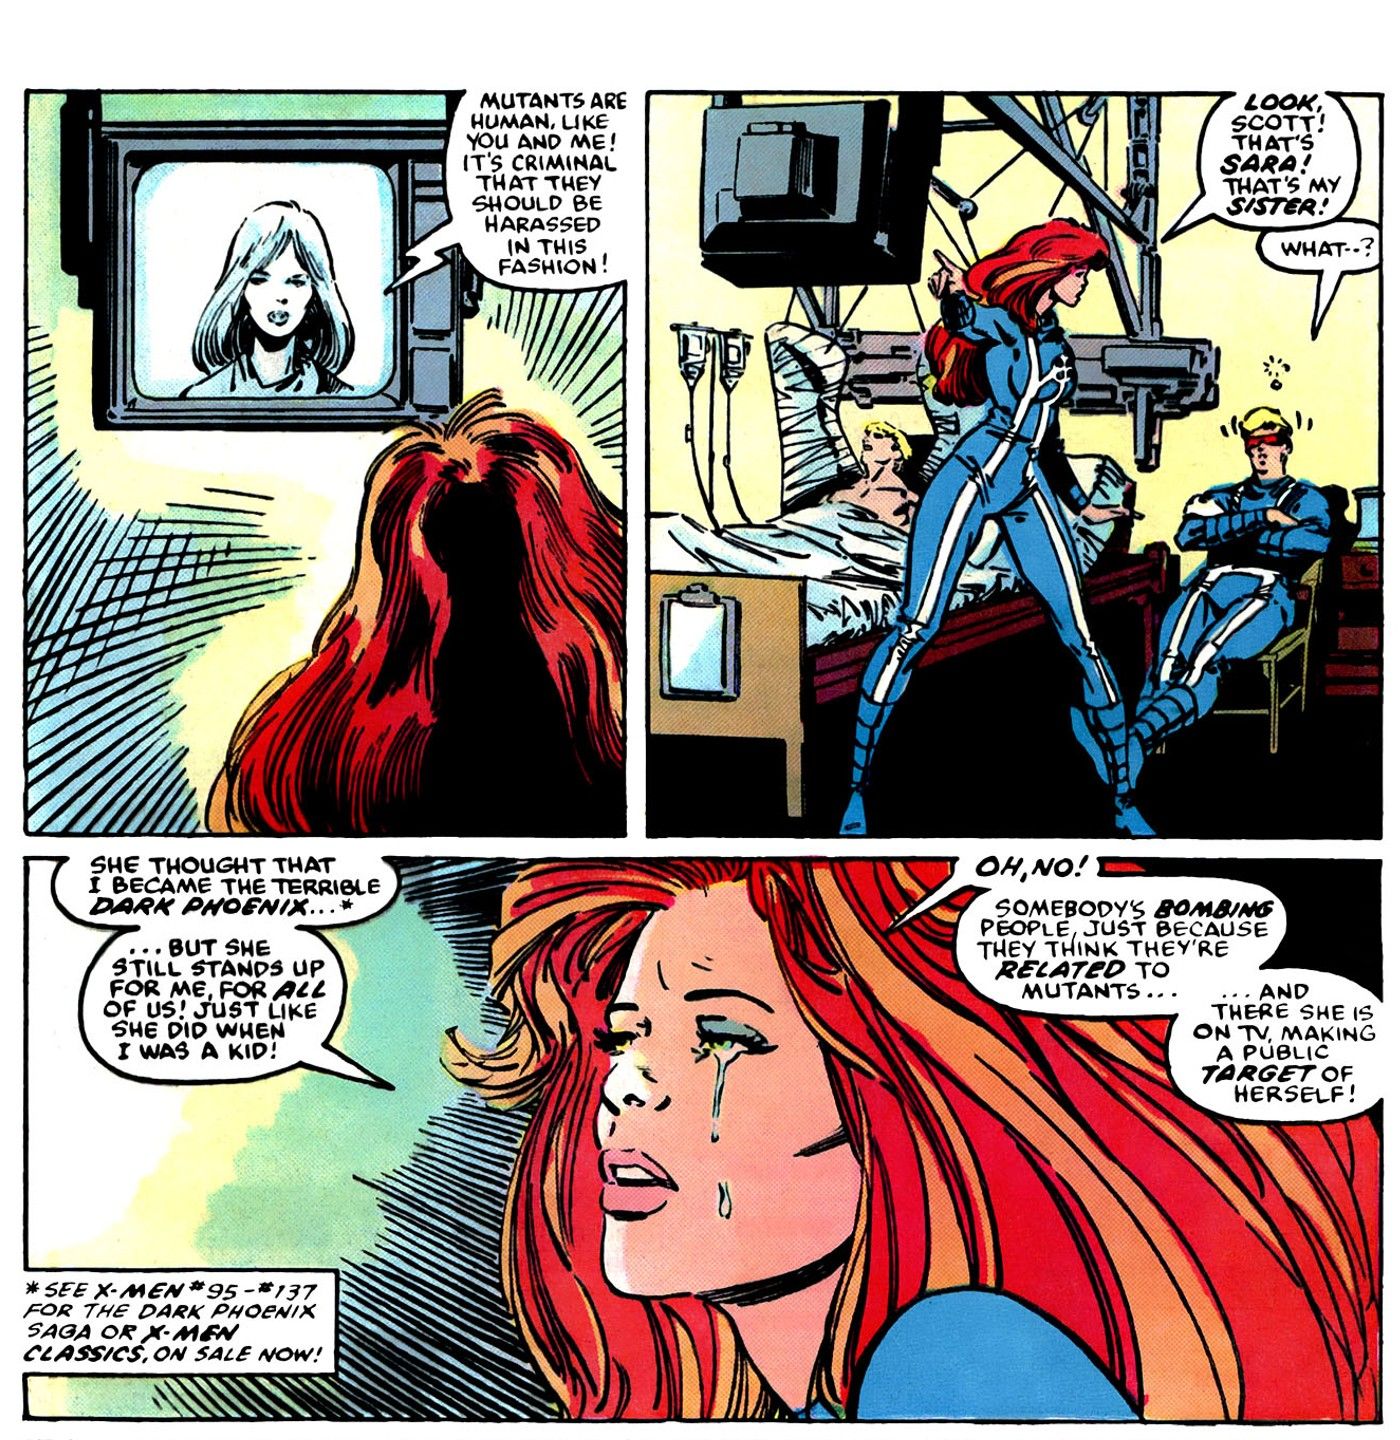 Cyclops and Jean Grey watch Sara Grey speak on the news in support of mutants like the X-Men